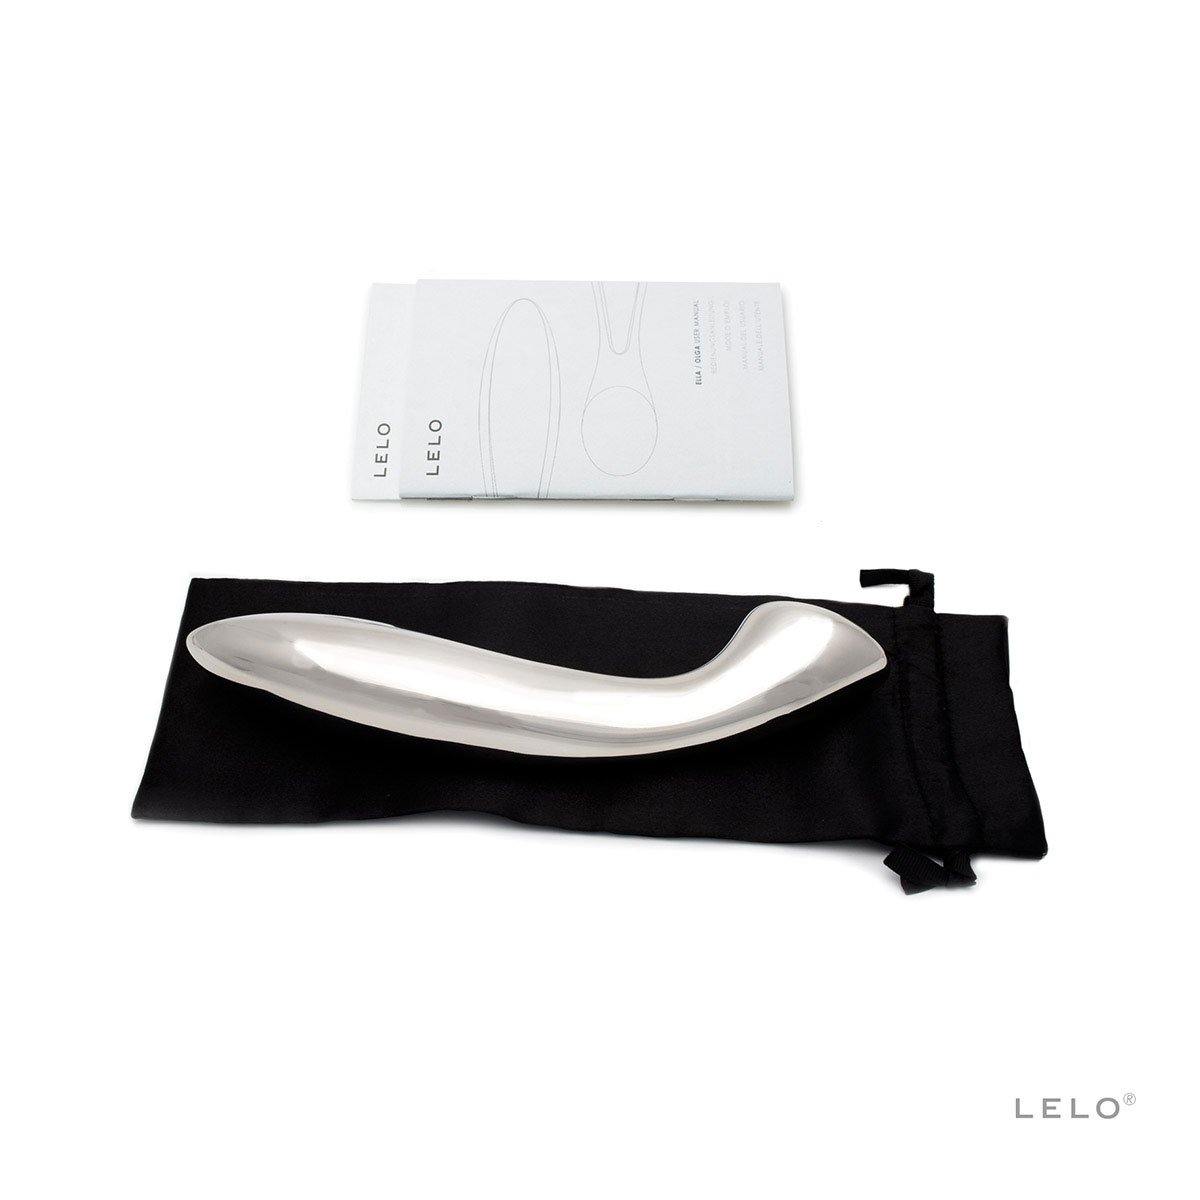 Lelo Olga Stainless Steel - Buy At Luxury Toy X - Free 3-Day Shipping